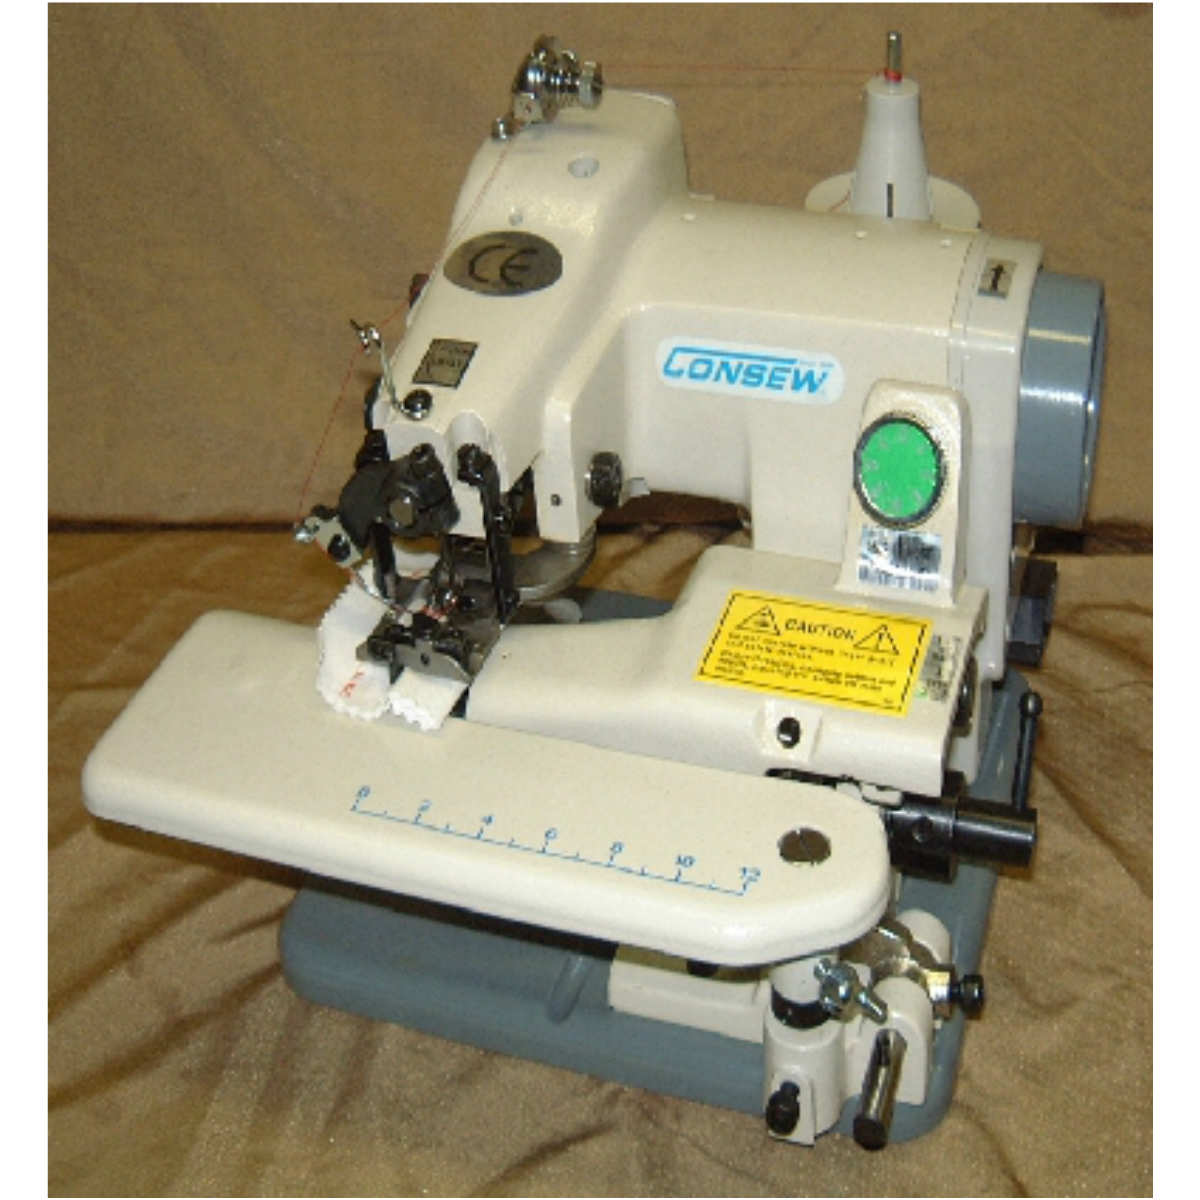 Gebeurt Bloemlezing injecteren Consew 75T “Portable Blind stitch“ - Stanley Sewing Industrial Sewing  Machines